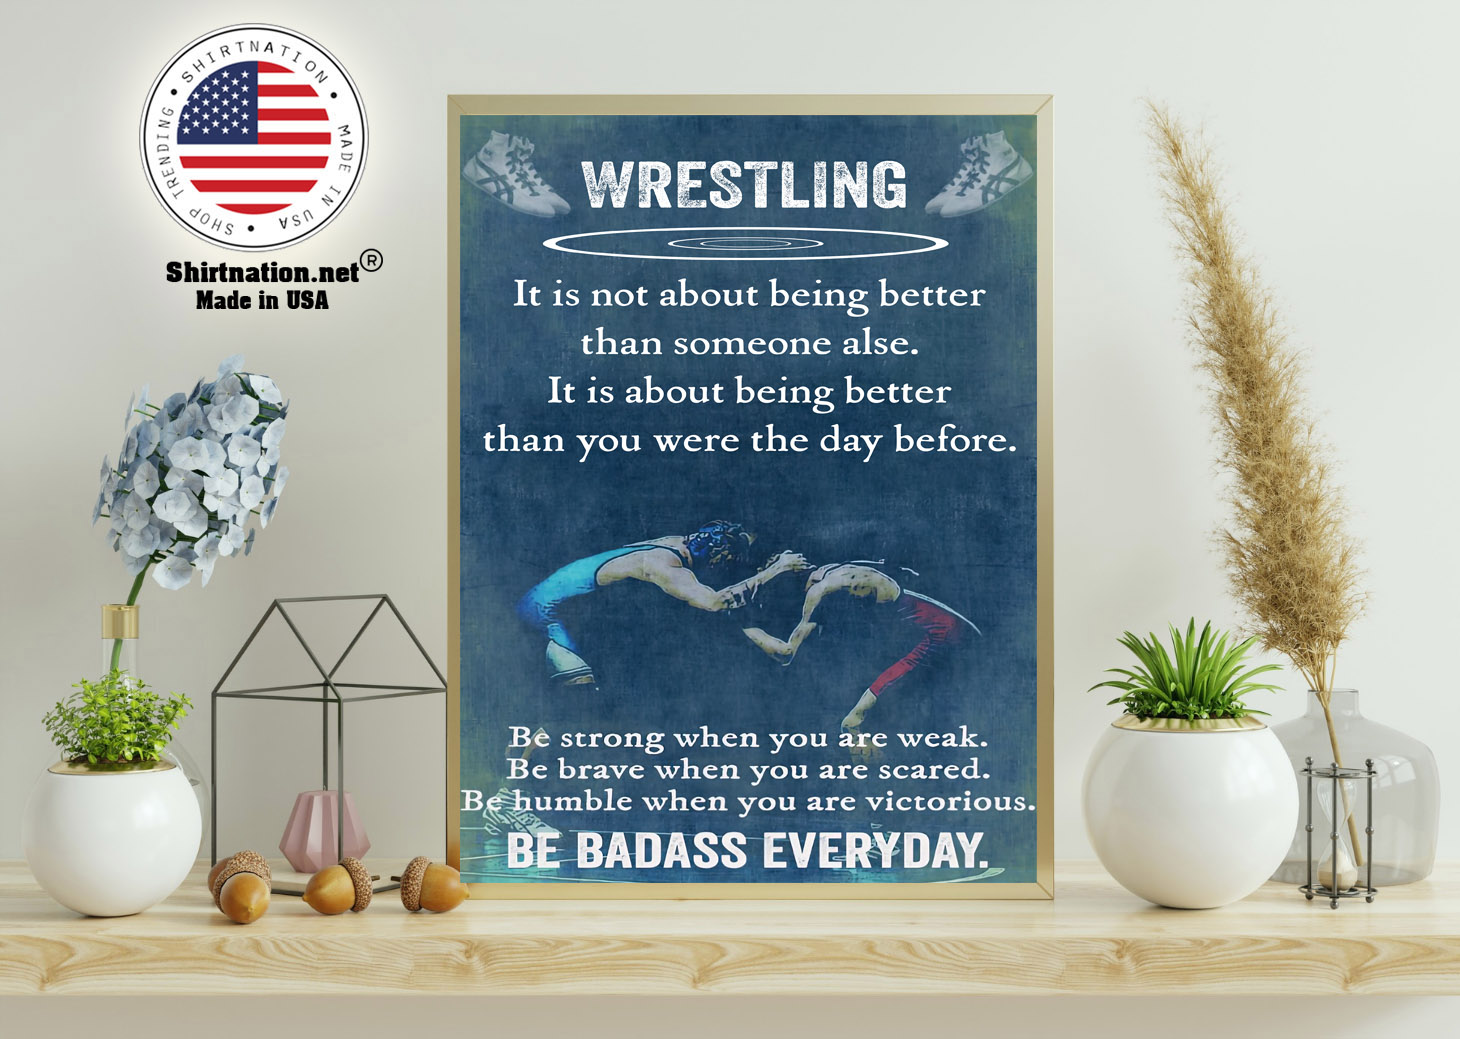 Wrestling it is not about being better than someine else poster 11